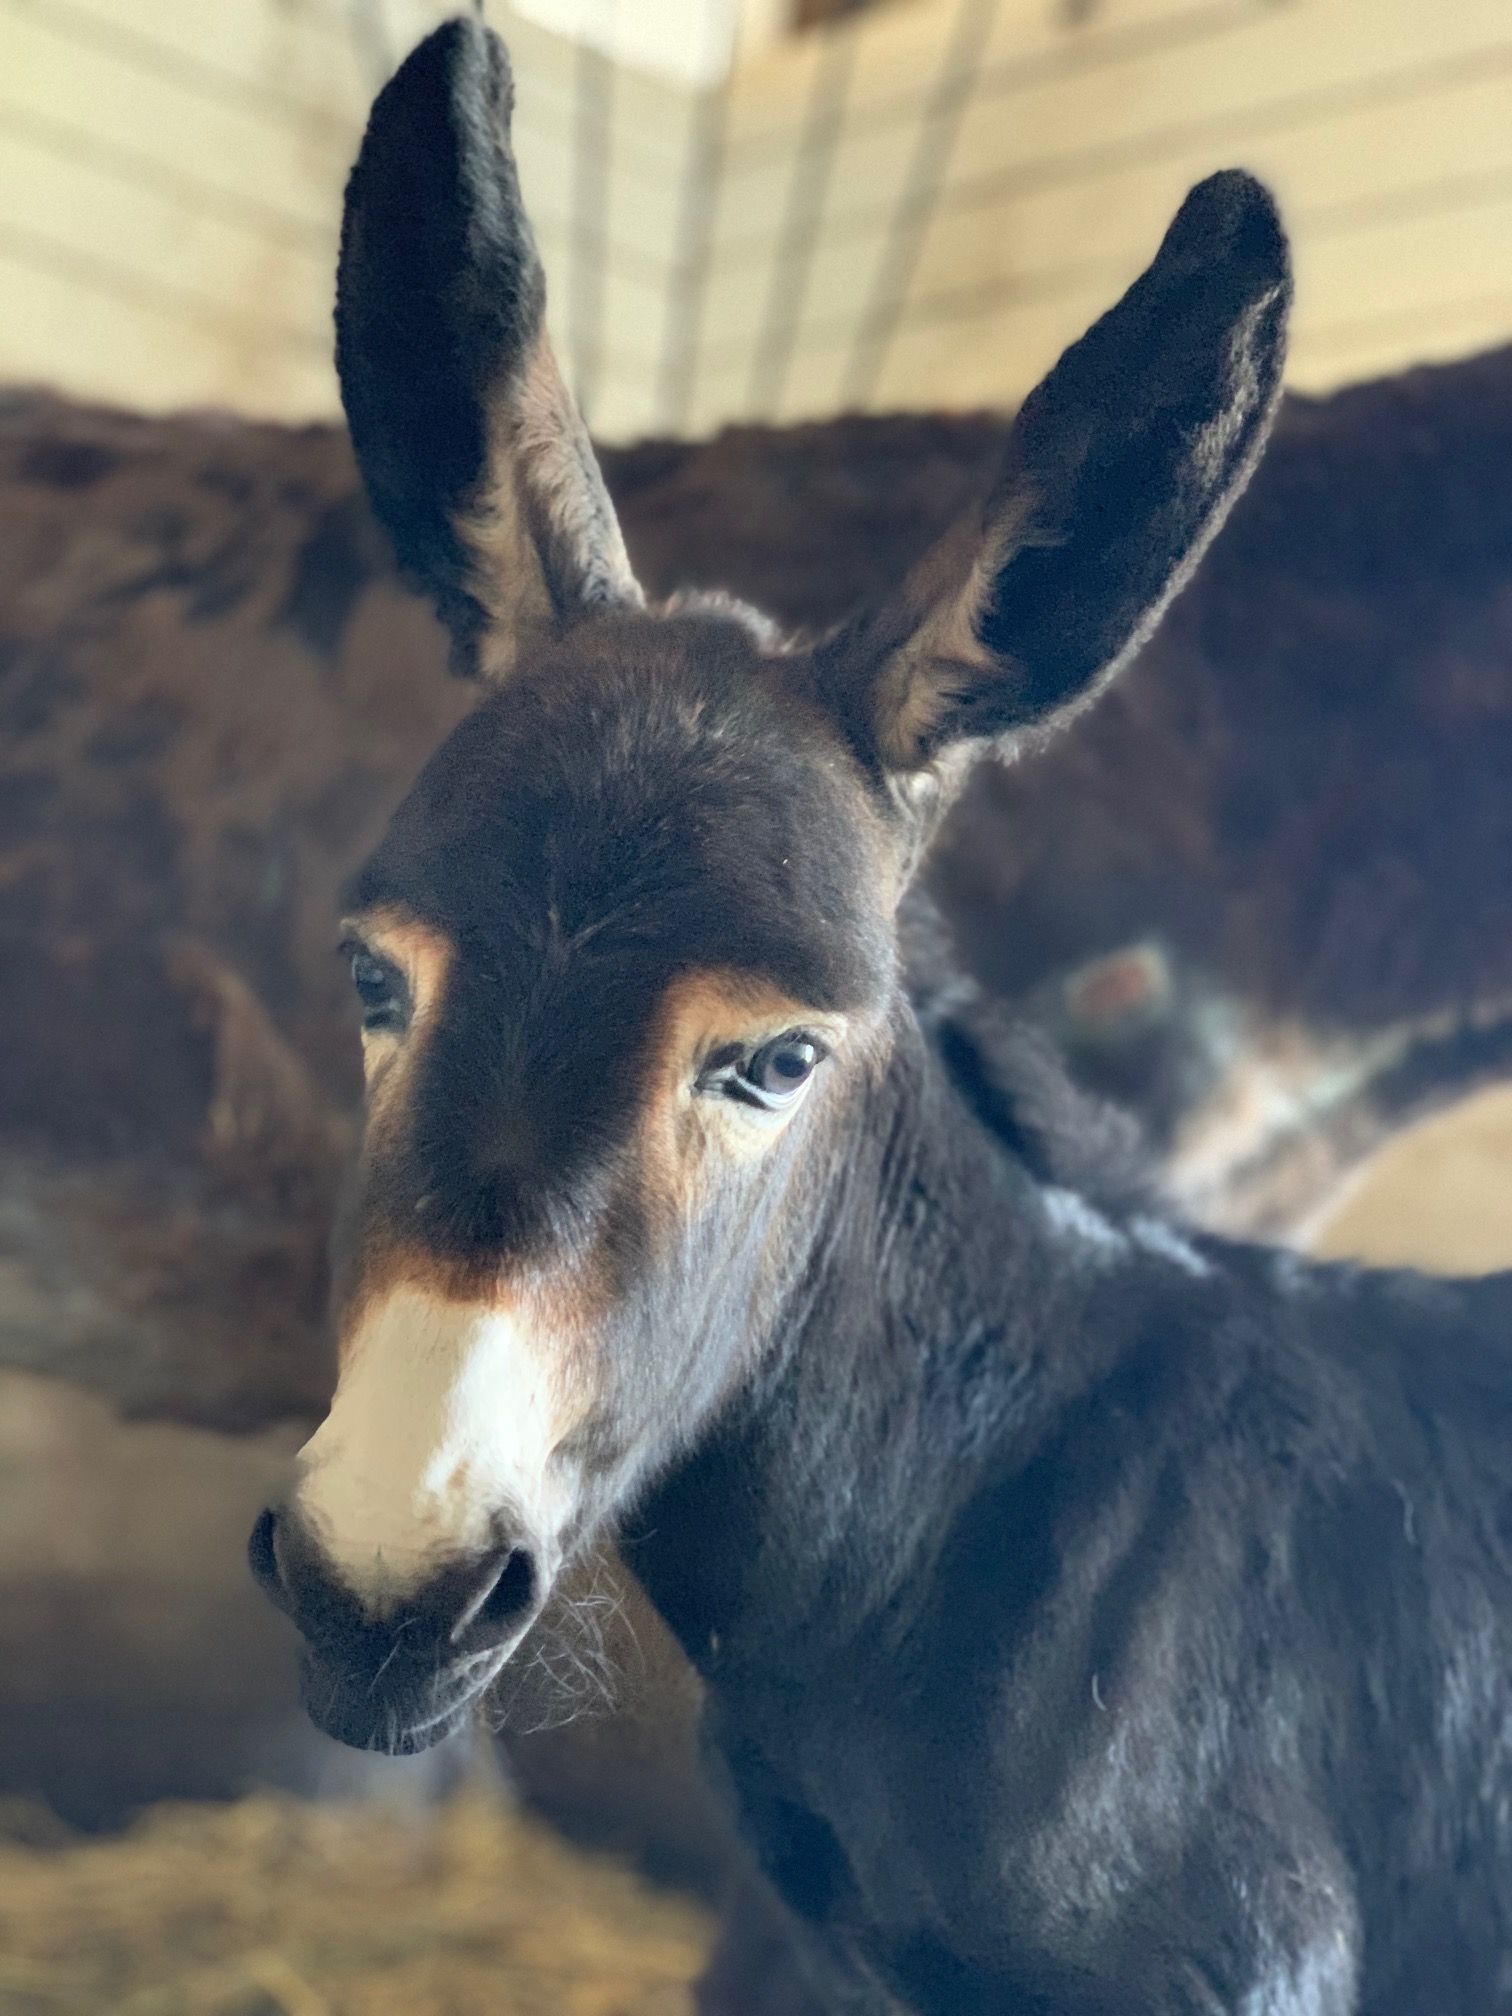 Violet, the baby donkey born at Foxie G.